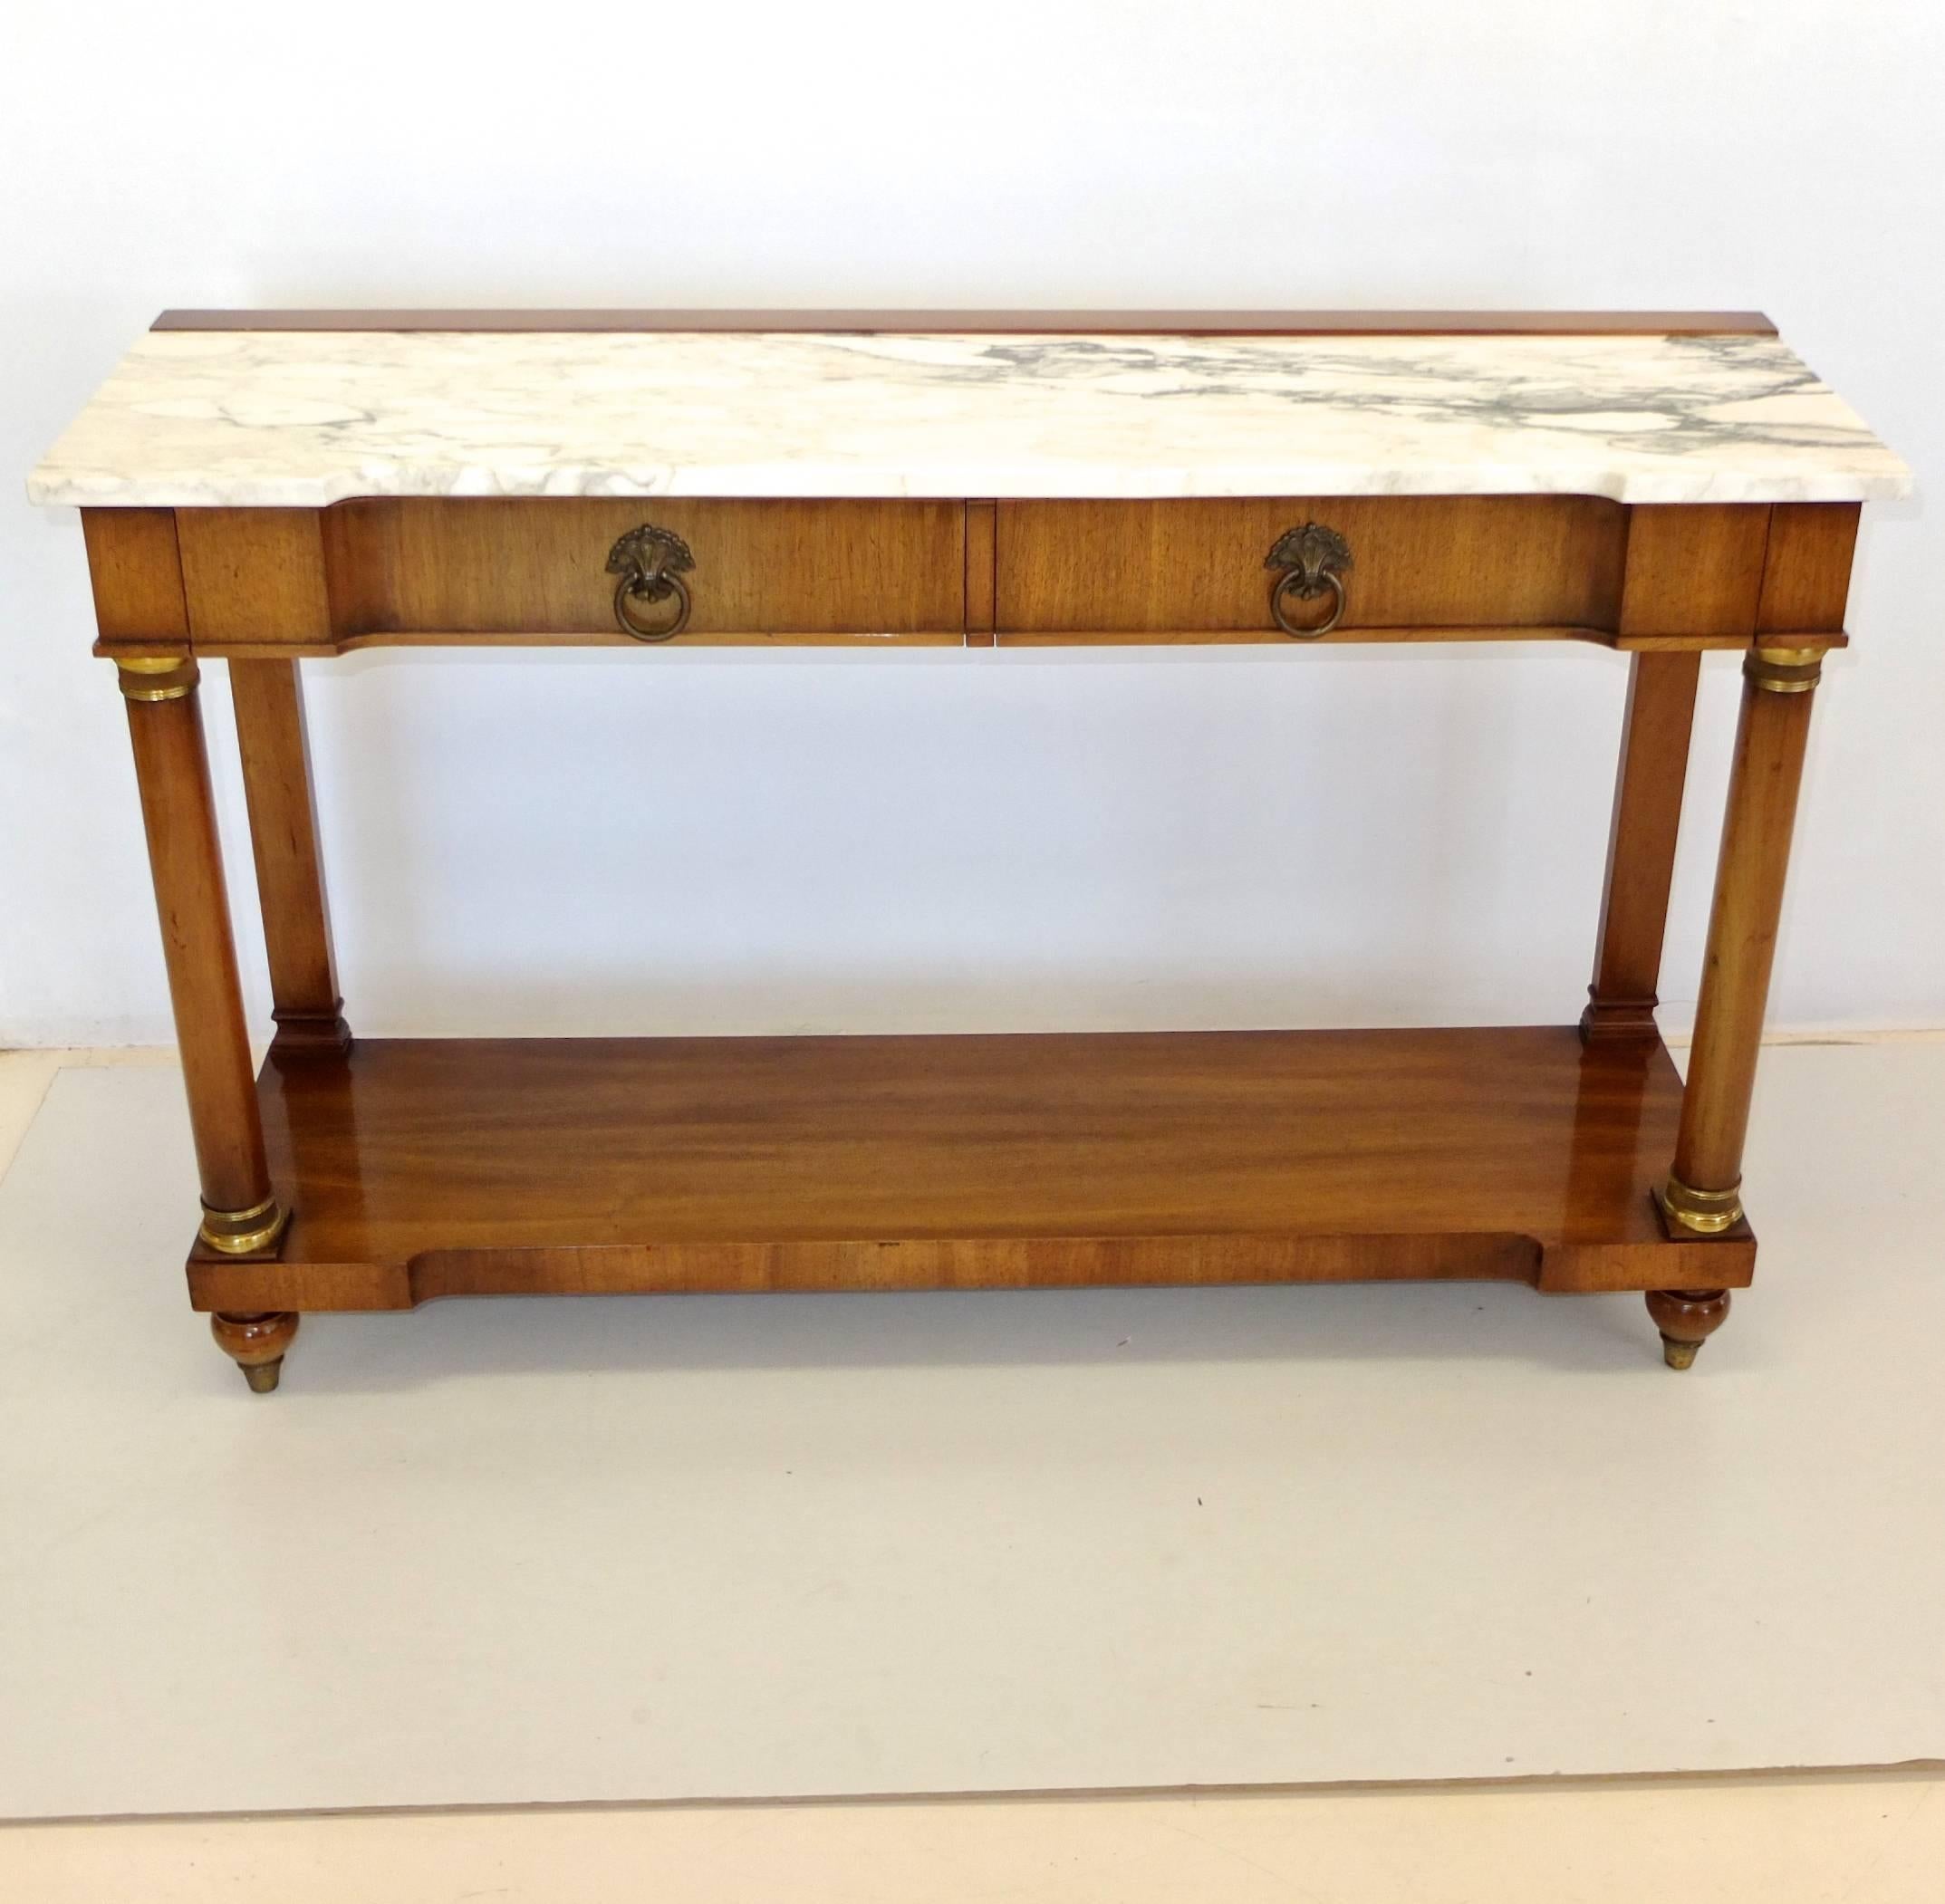 Empire style console table by John Widdicomb, circa 1960. Notched front edge white with black/gray marble top over two drawers having dovetail construction and brass ring pulls, supported by two turned columns with ormolu mounts and two flat colums